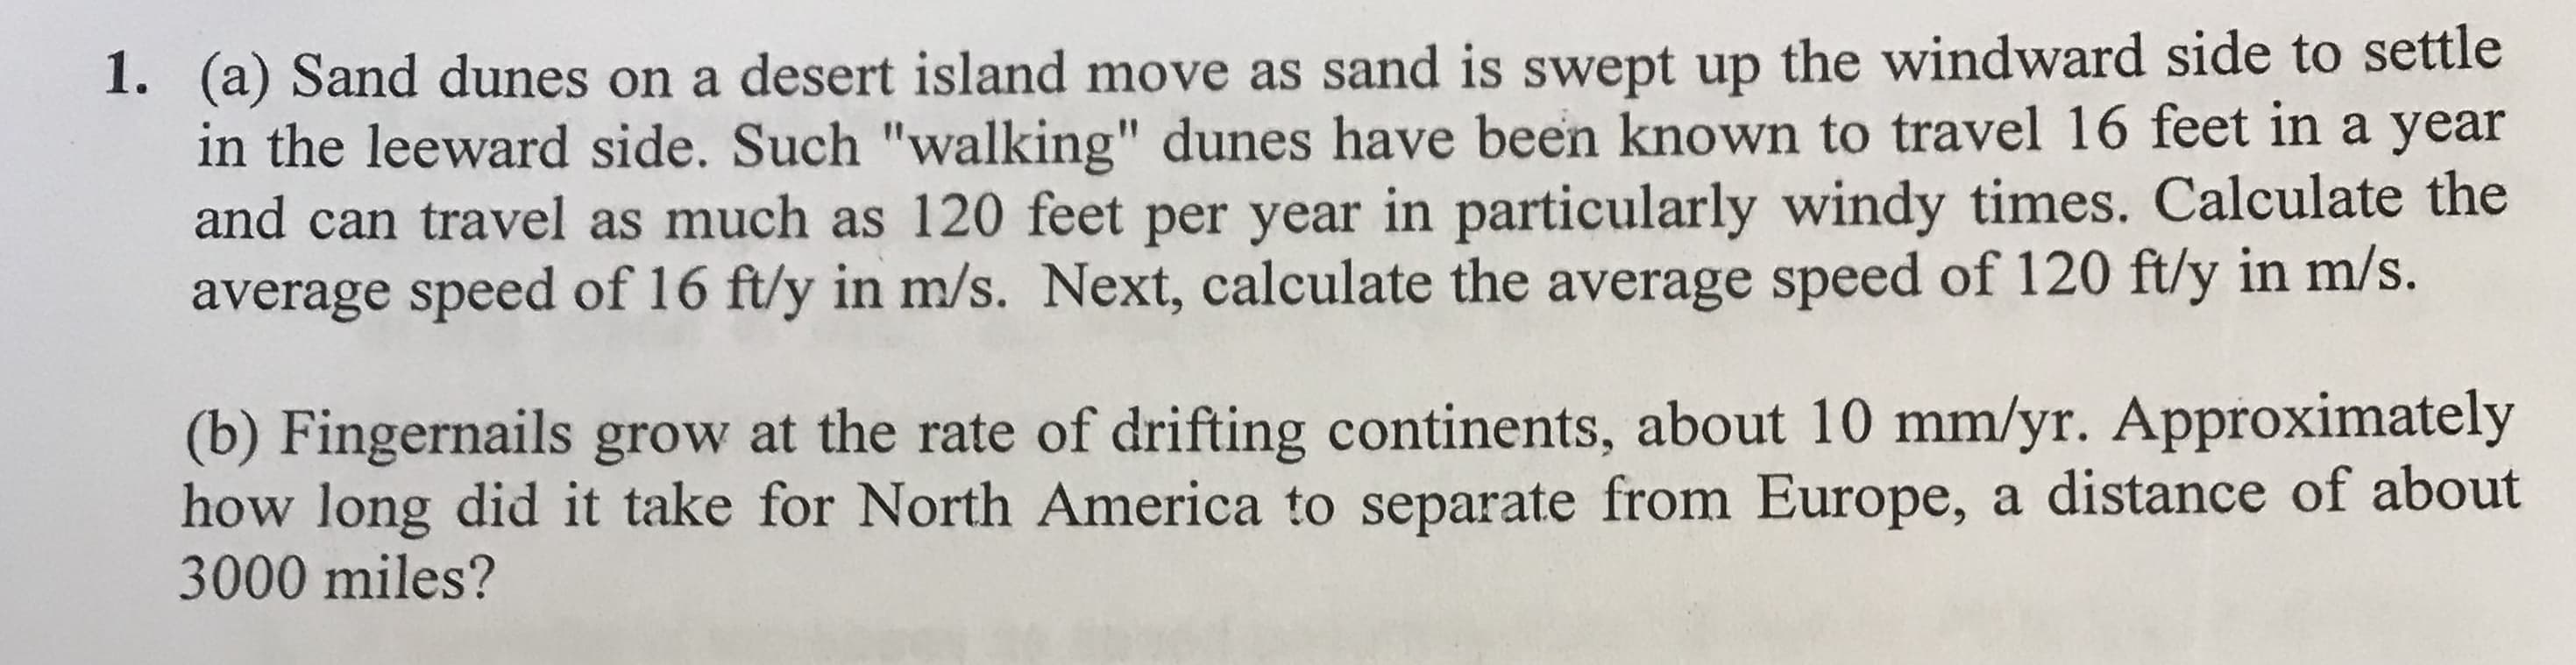 (a) Sand dunes on a desert island move as sand is swept up the windward side to settle
in the leeward side. Such "walking" dunes have been known to travel 16 feet in a year
and can travel as much as 120 feet per year in particularly windy times. Calculate the
average speed of 16 ftly in m/s. Next, calculate the average speed of 120 ftly in m/s.
1.
(b) Fingernails grow at the rate of drifting continents, about 10 mm/yr. Approximately
how long did it take for North America to separate from Europe, a distance of about
3000 miles?
